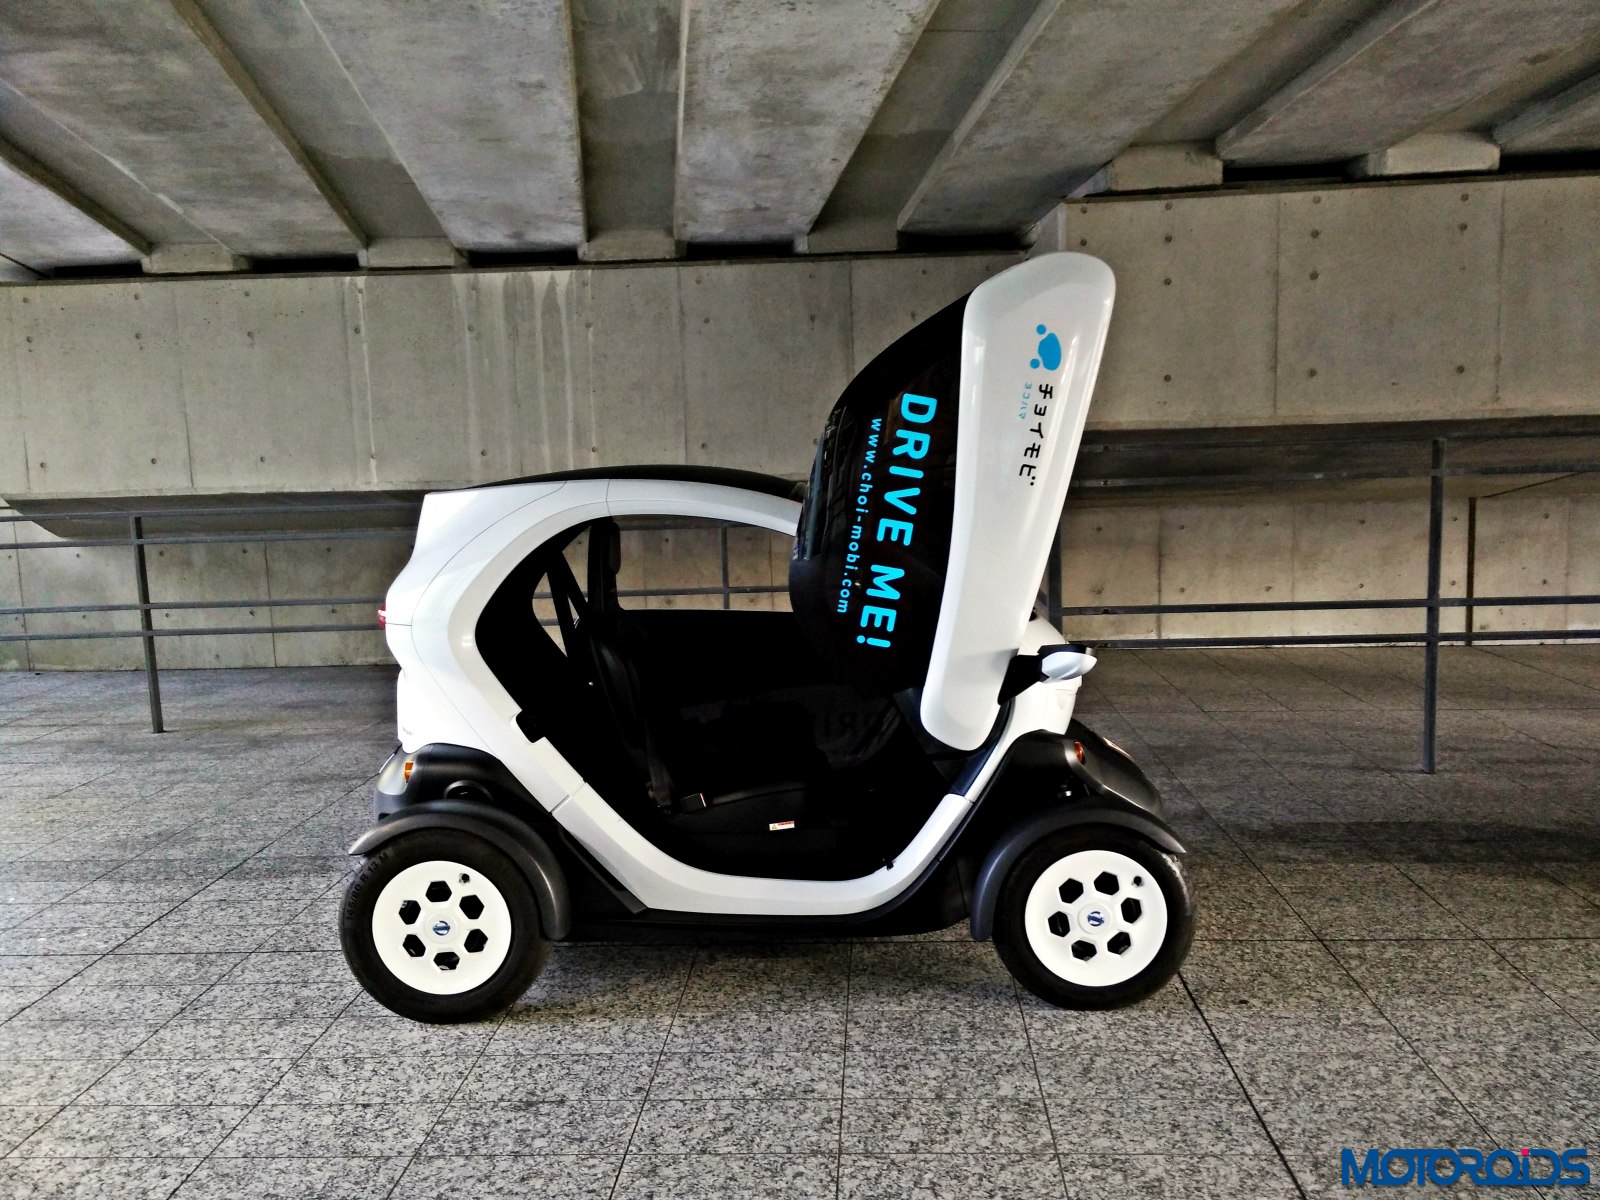 Nissan personal mobility vehicle concept #10